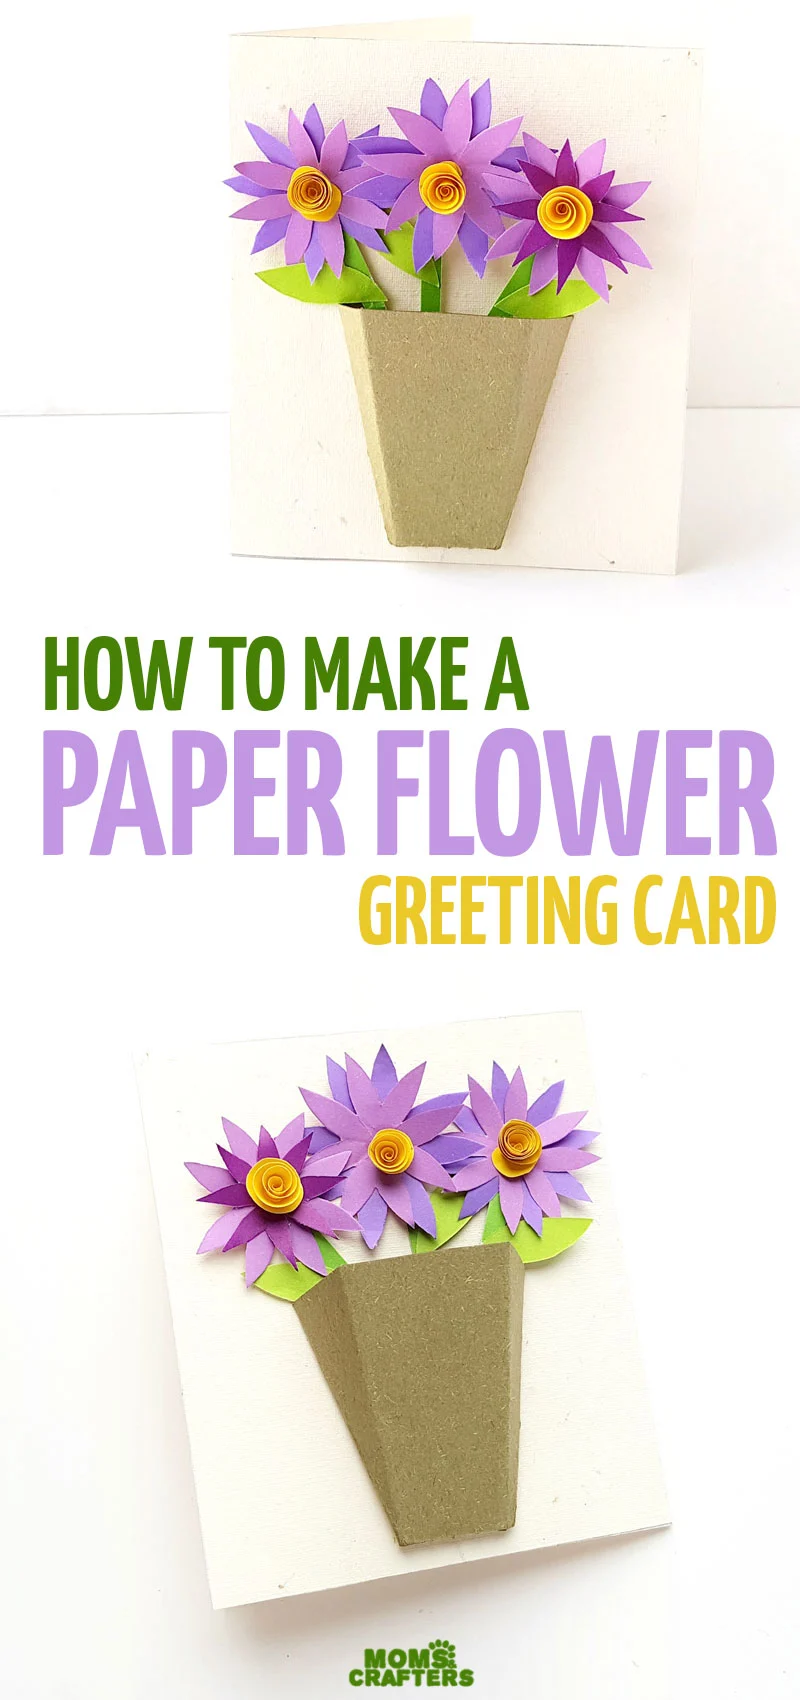 Make a DIY paper flower card with a 3D flower bouquet - a fun and easy paper craft for teens and tweens, for Spring, or for any time